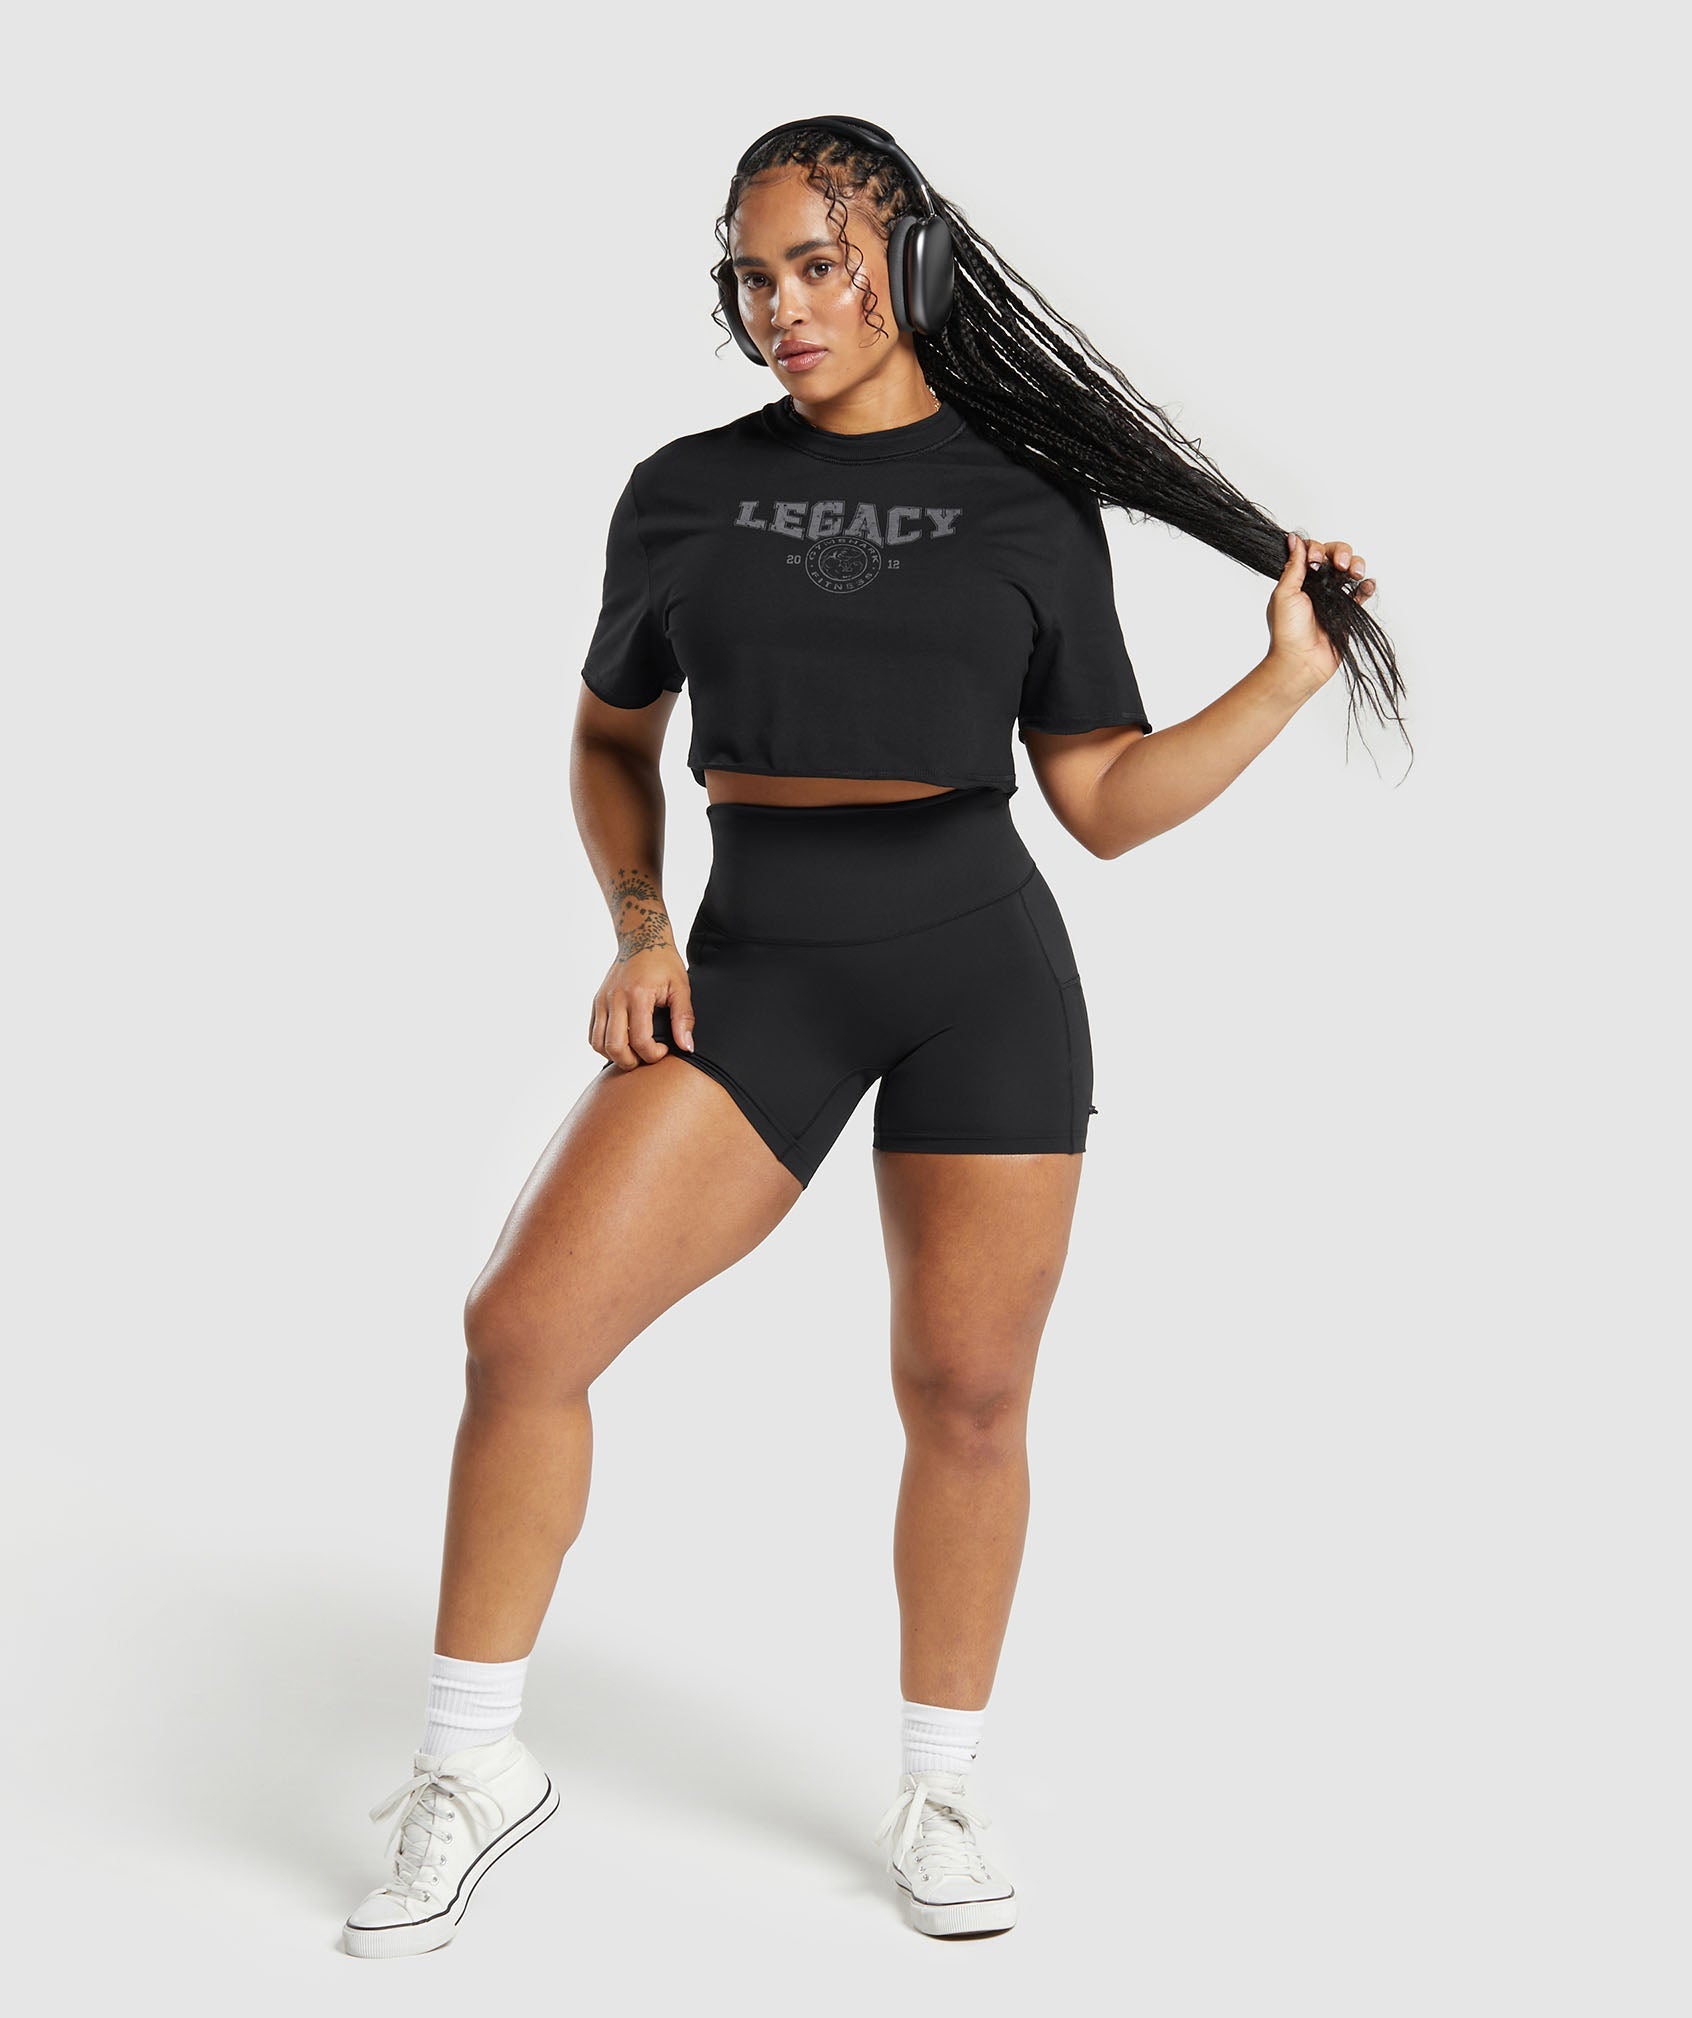 Legacy Graphic Crop Top in Black - view 4